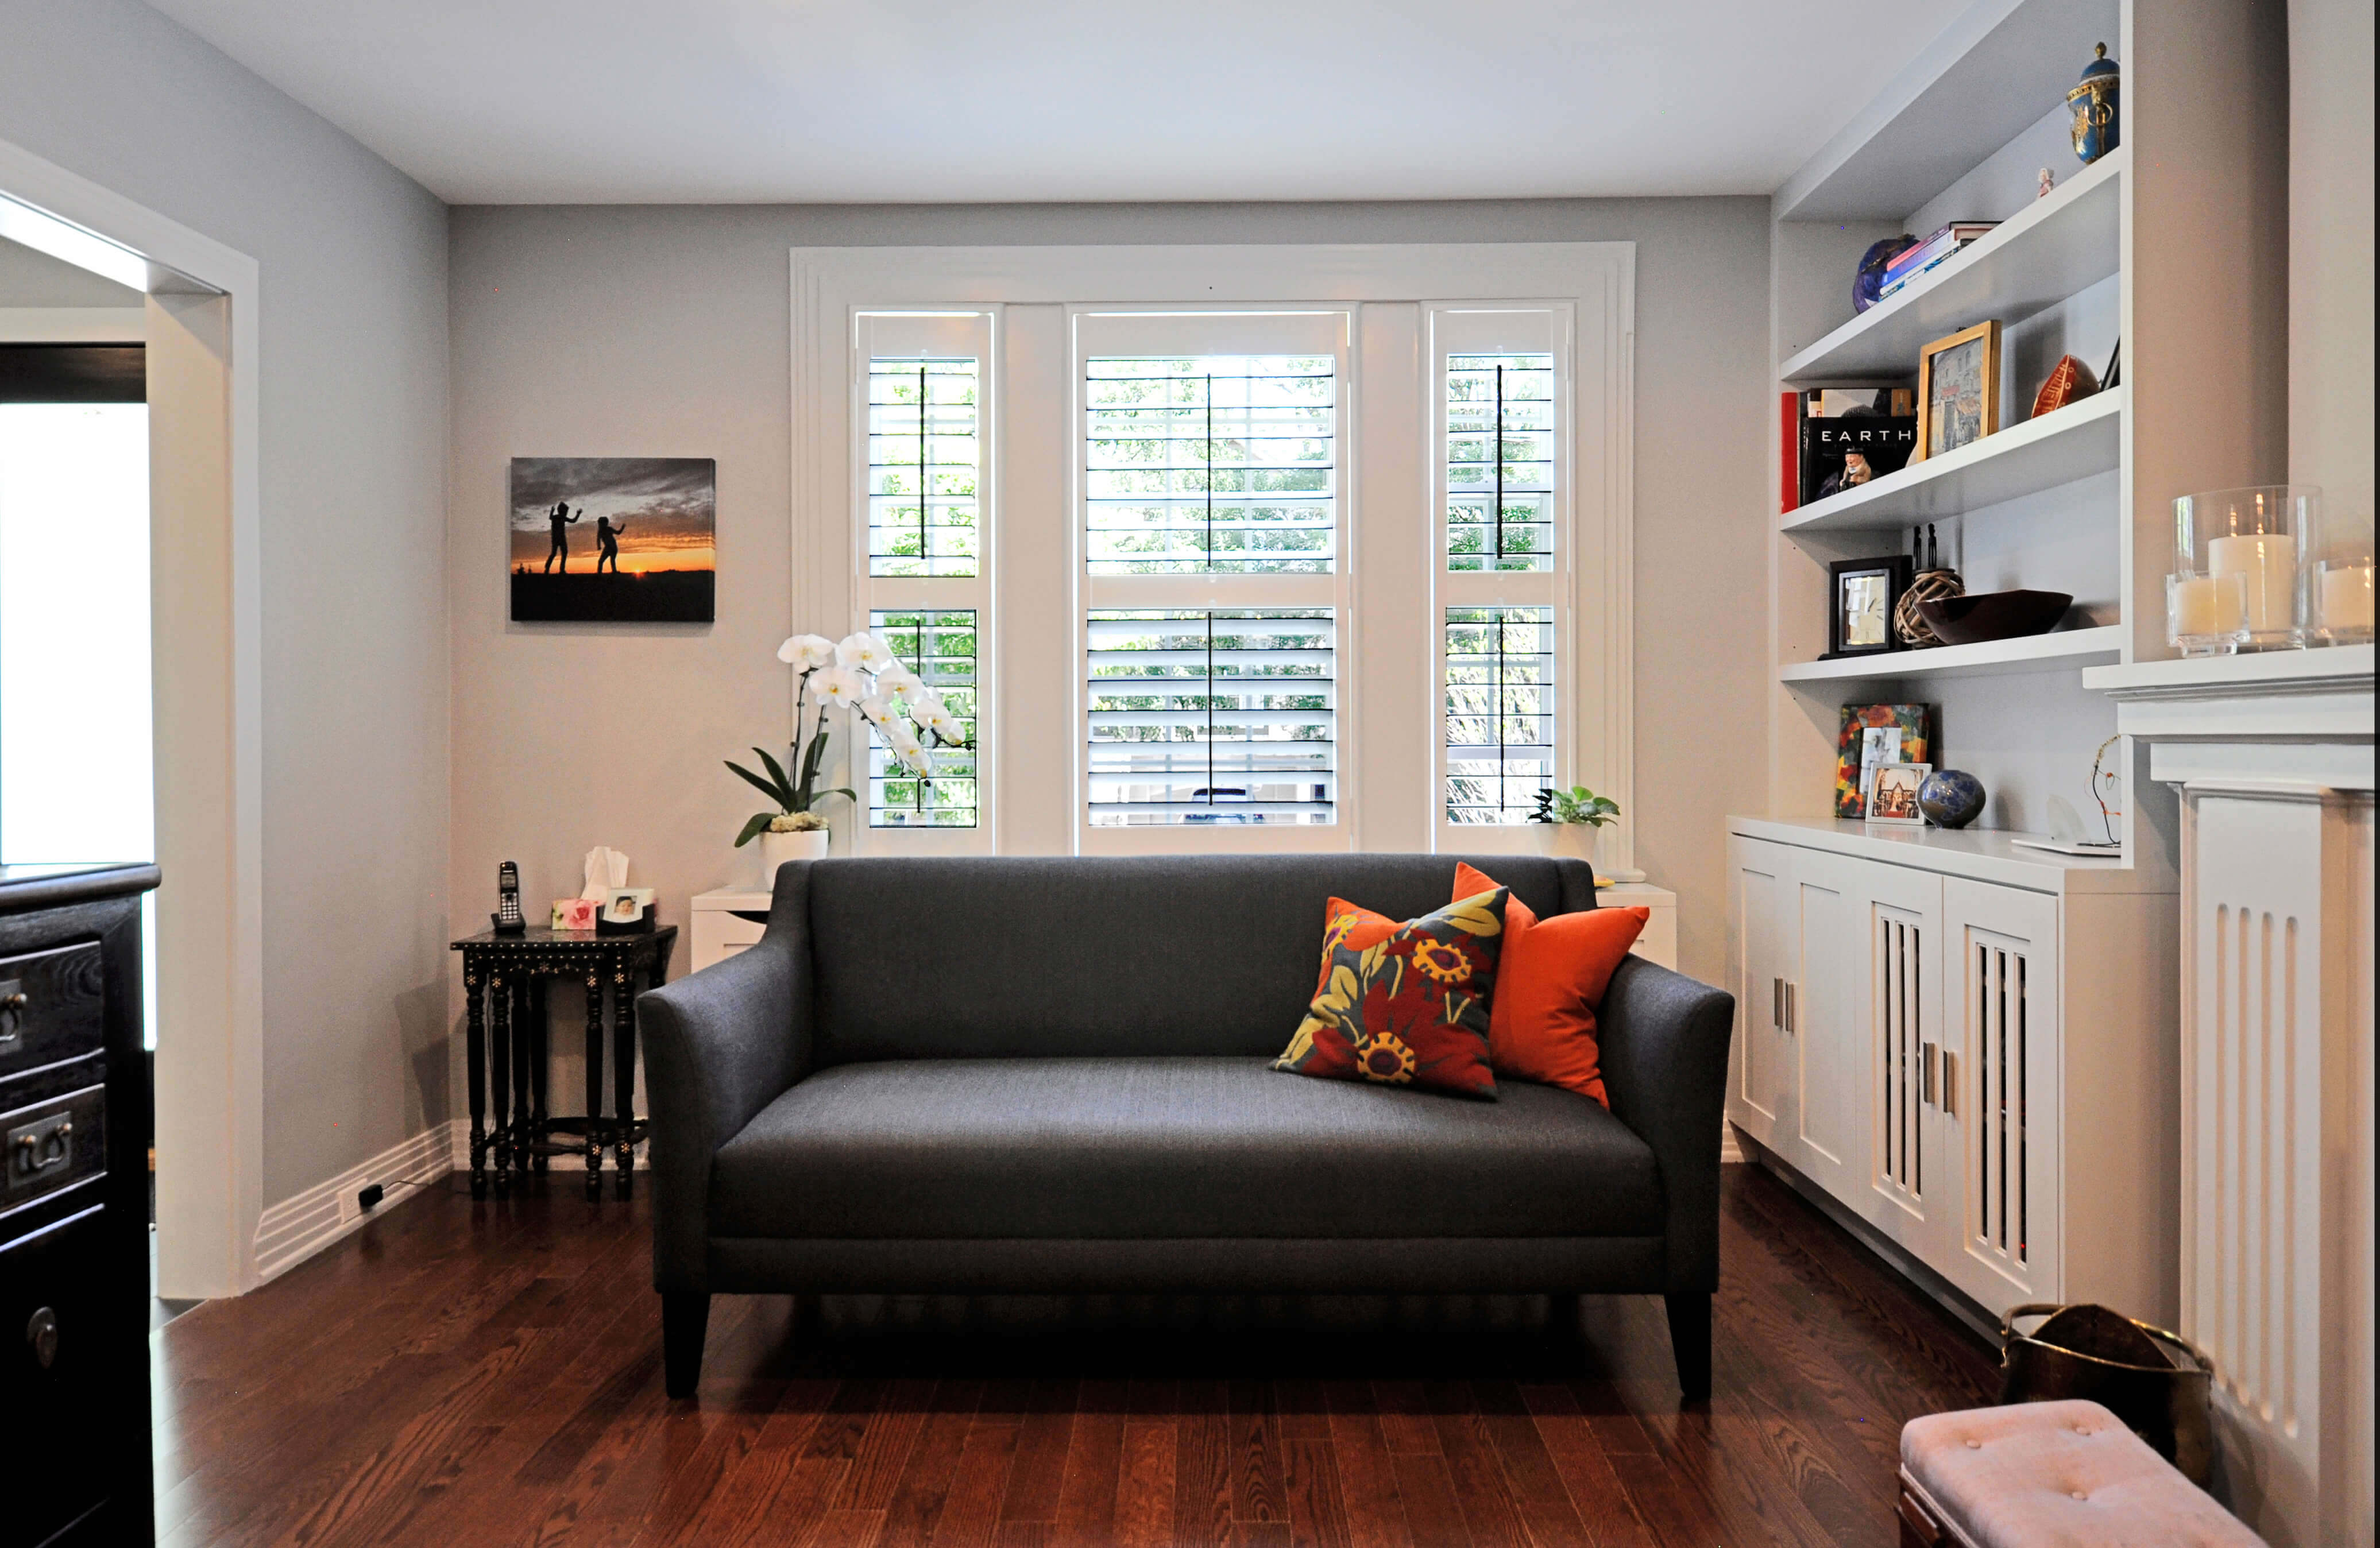 Living room. Grey couch with red accent pillows under a window. The window has white California shutters. Wood floors. Built in white floor to ceiling shelves.